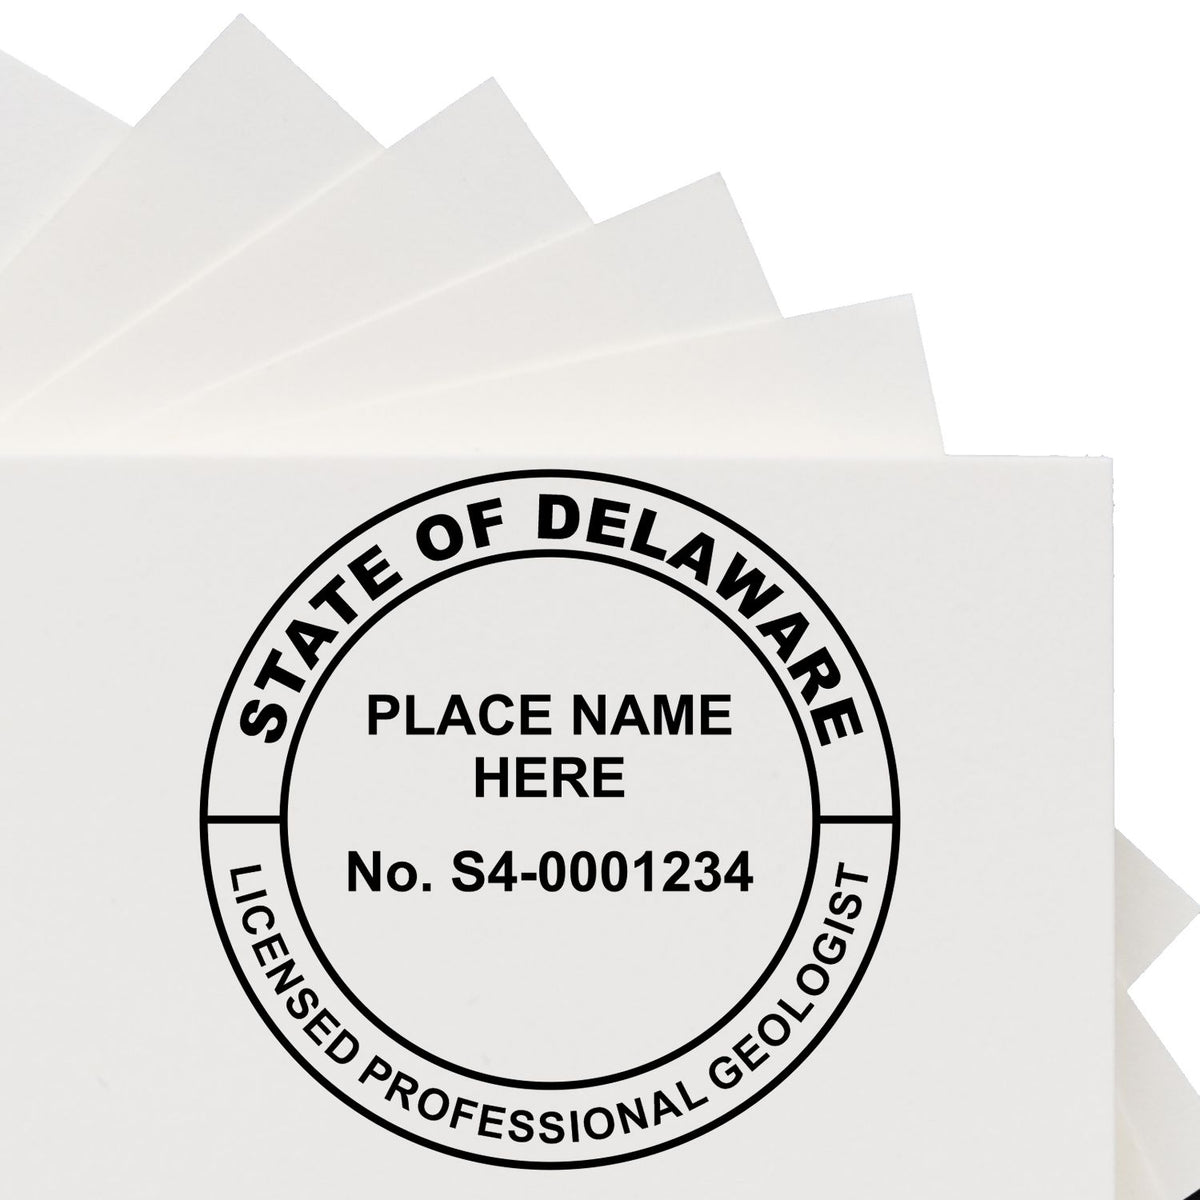 The Delaware Professional Geologist Seal Stamp stamp impression comes to life with a crisp, detailed image stamped on paper - showcasing true professional quality.